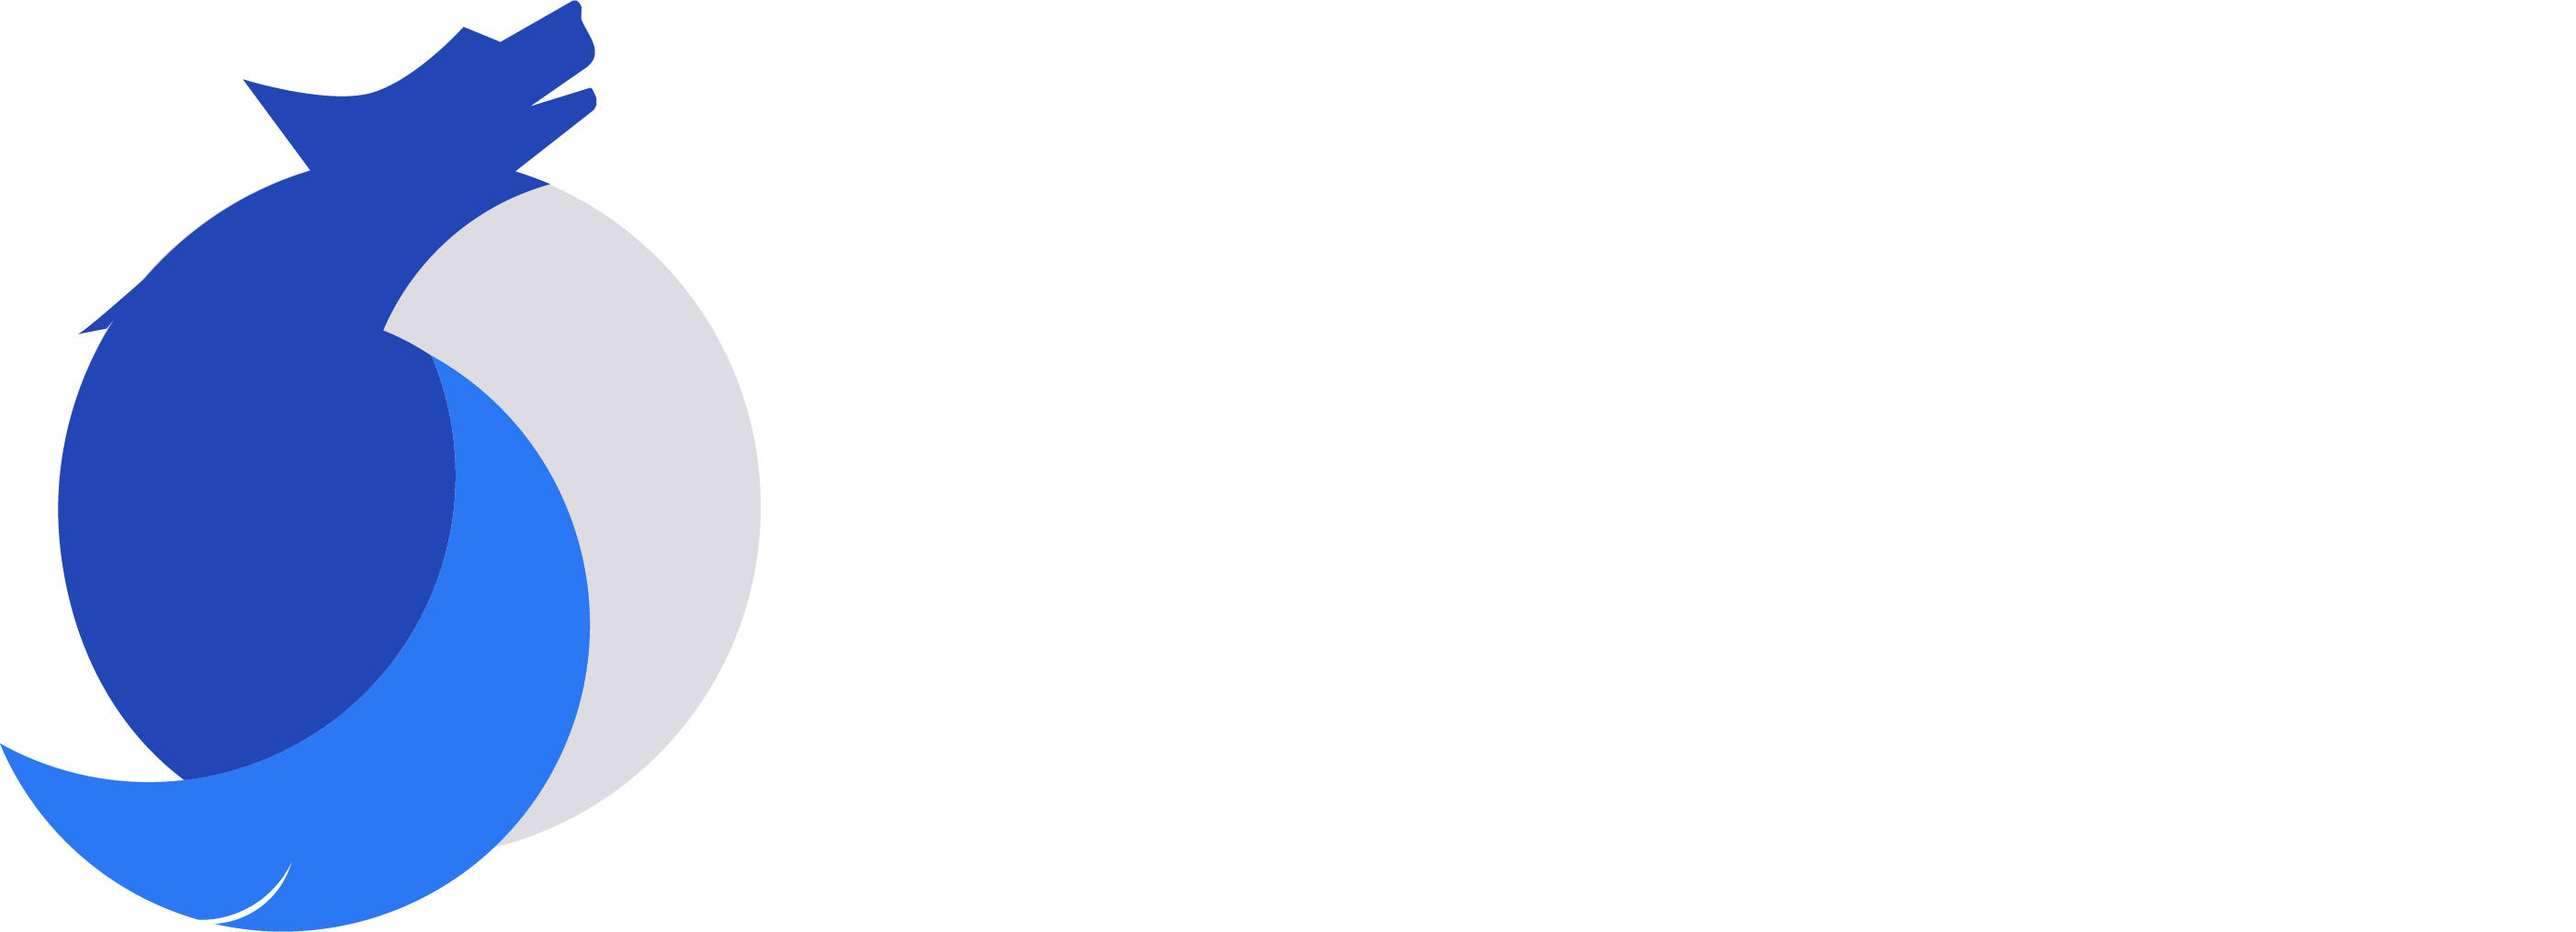 Soft Wolf Digital Agency | Production House